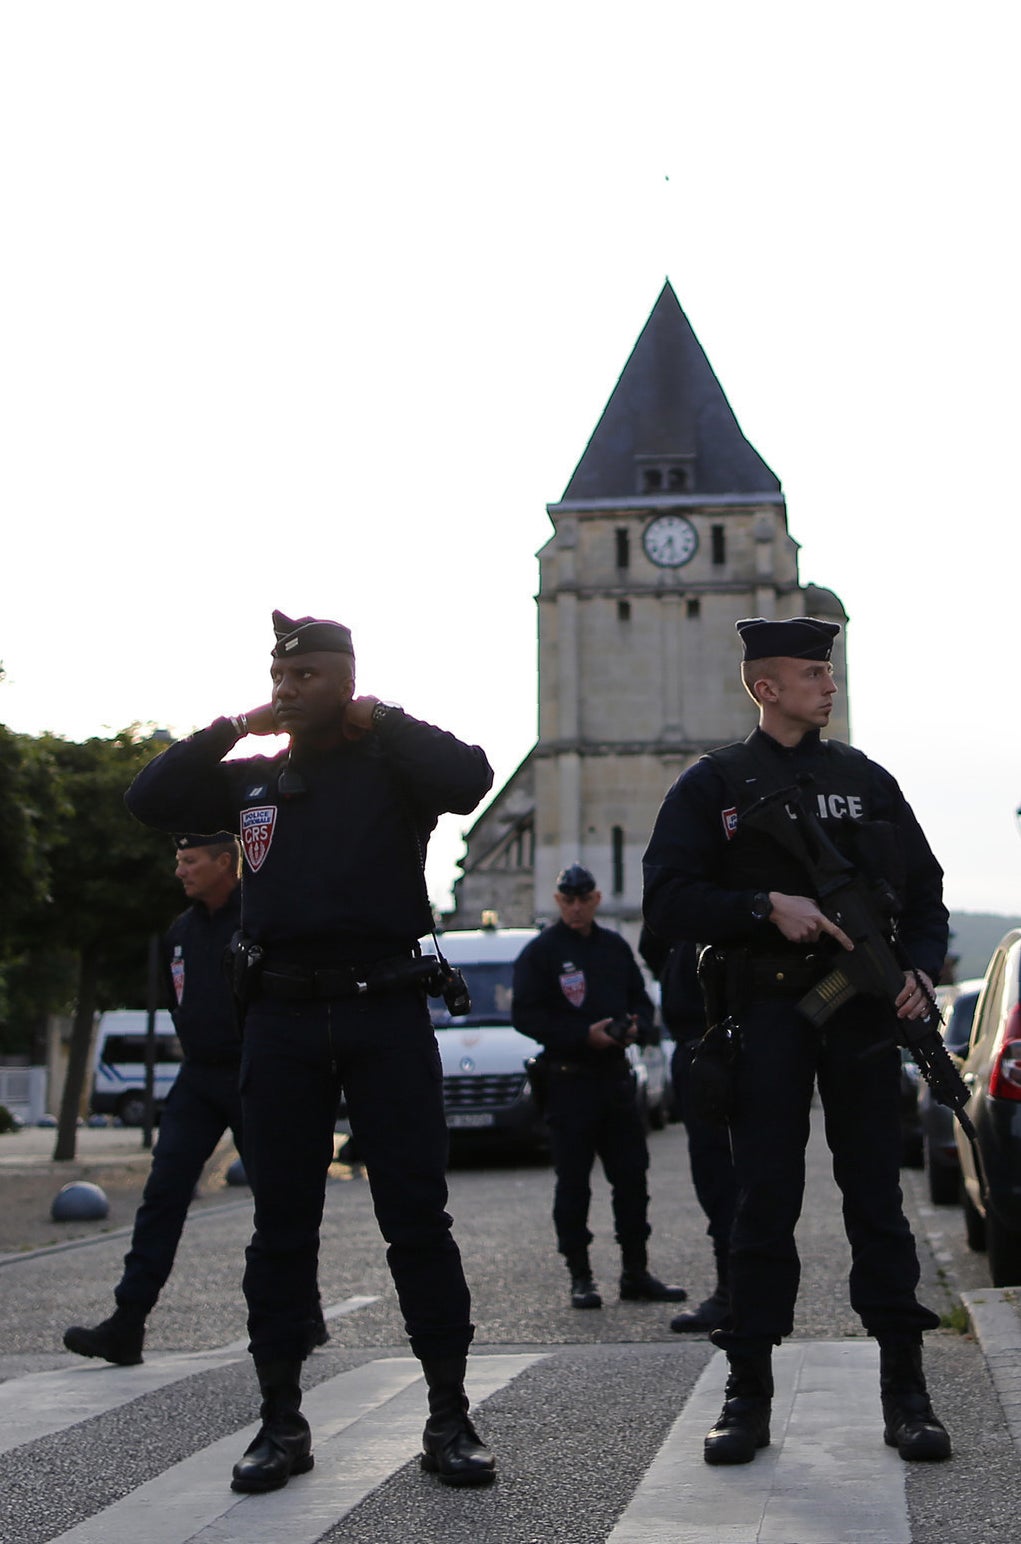 Police outside the church in Saint-Etienne-du-Rouvray